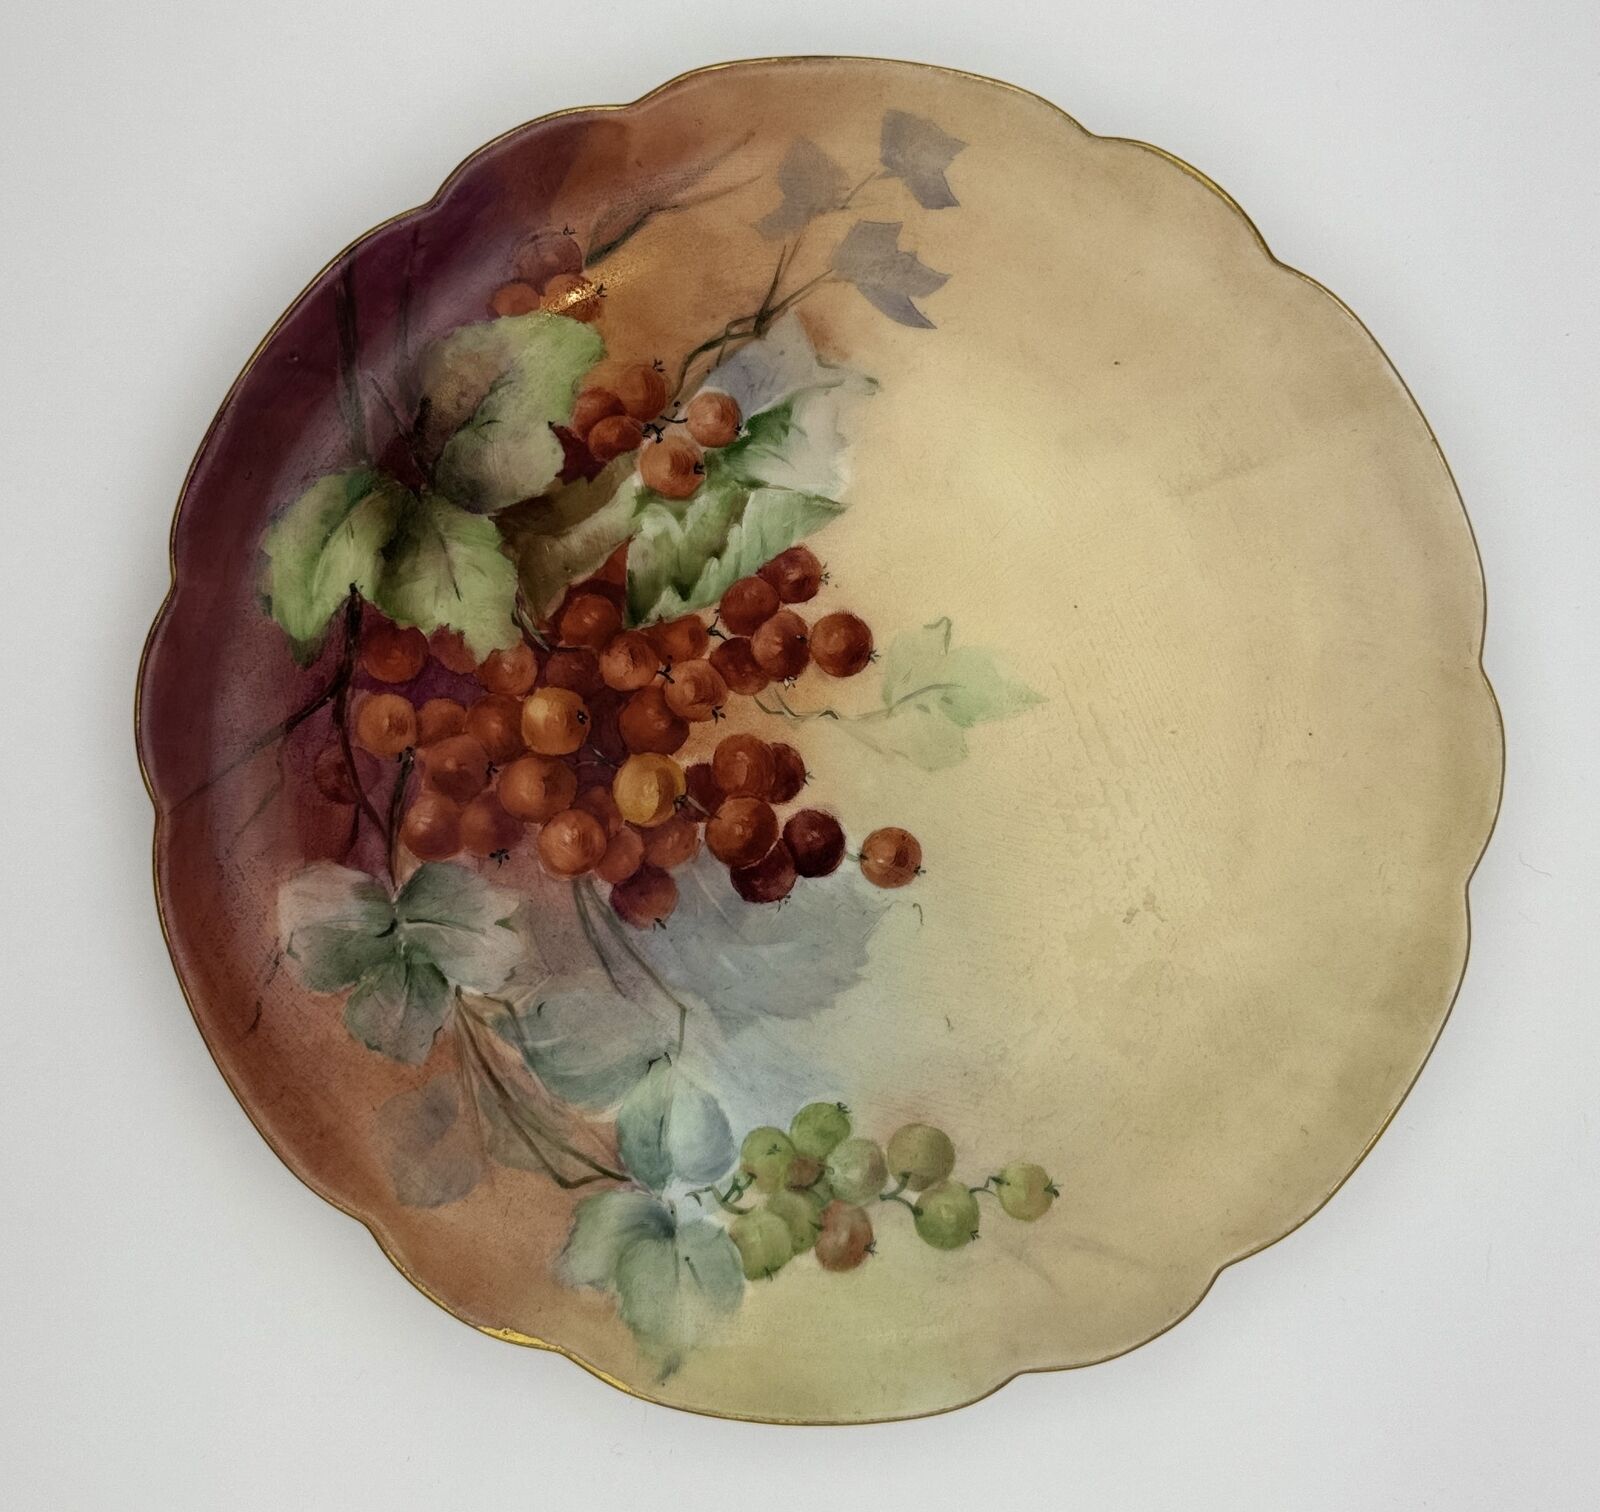 Rare Haviland France Hand-Painted Plate by E. O. Staab (1906) - Grape Design